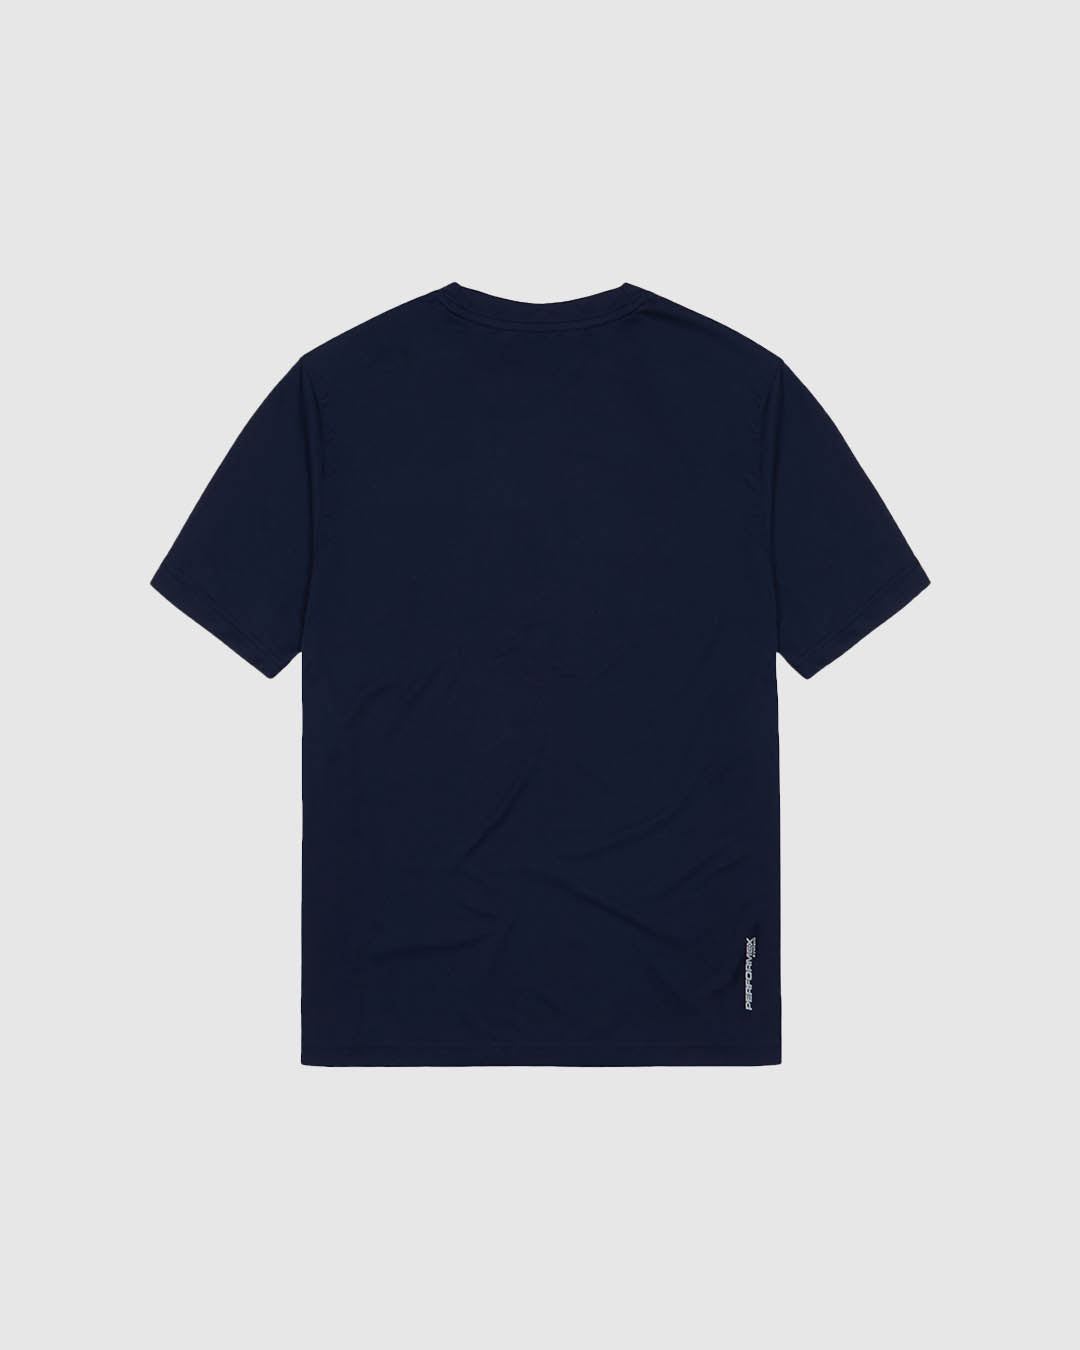 Derbyshire CCC - EP:0110 - Performance Tee 2.1 - Navy